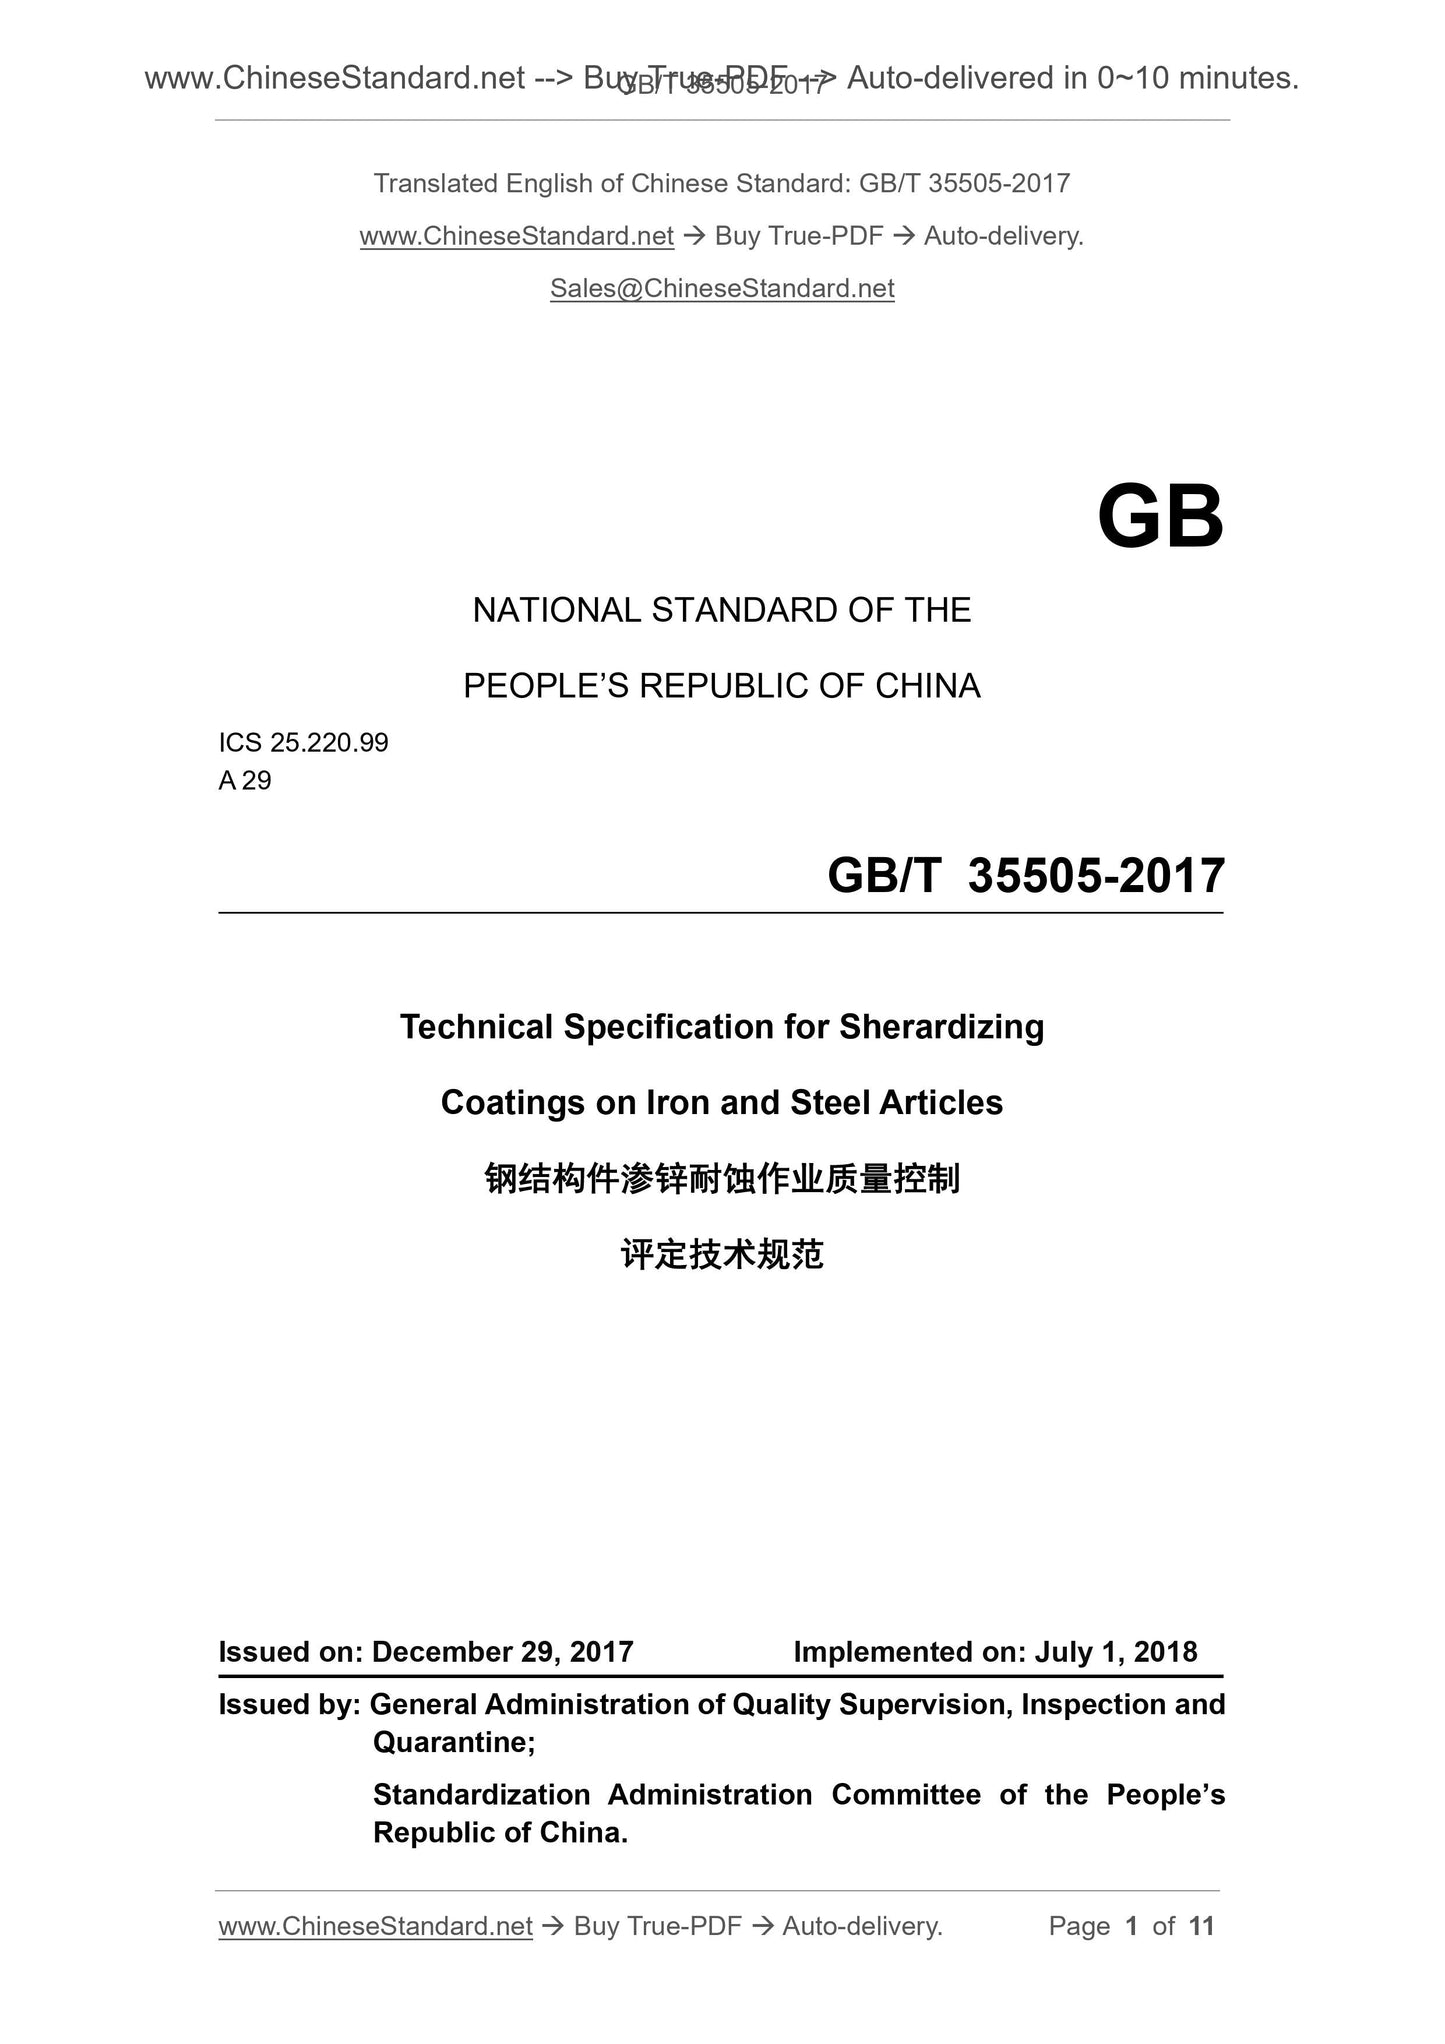 GB/T 35505-2017 Page 1